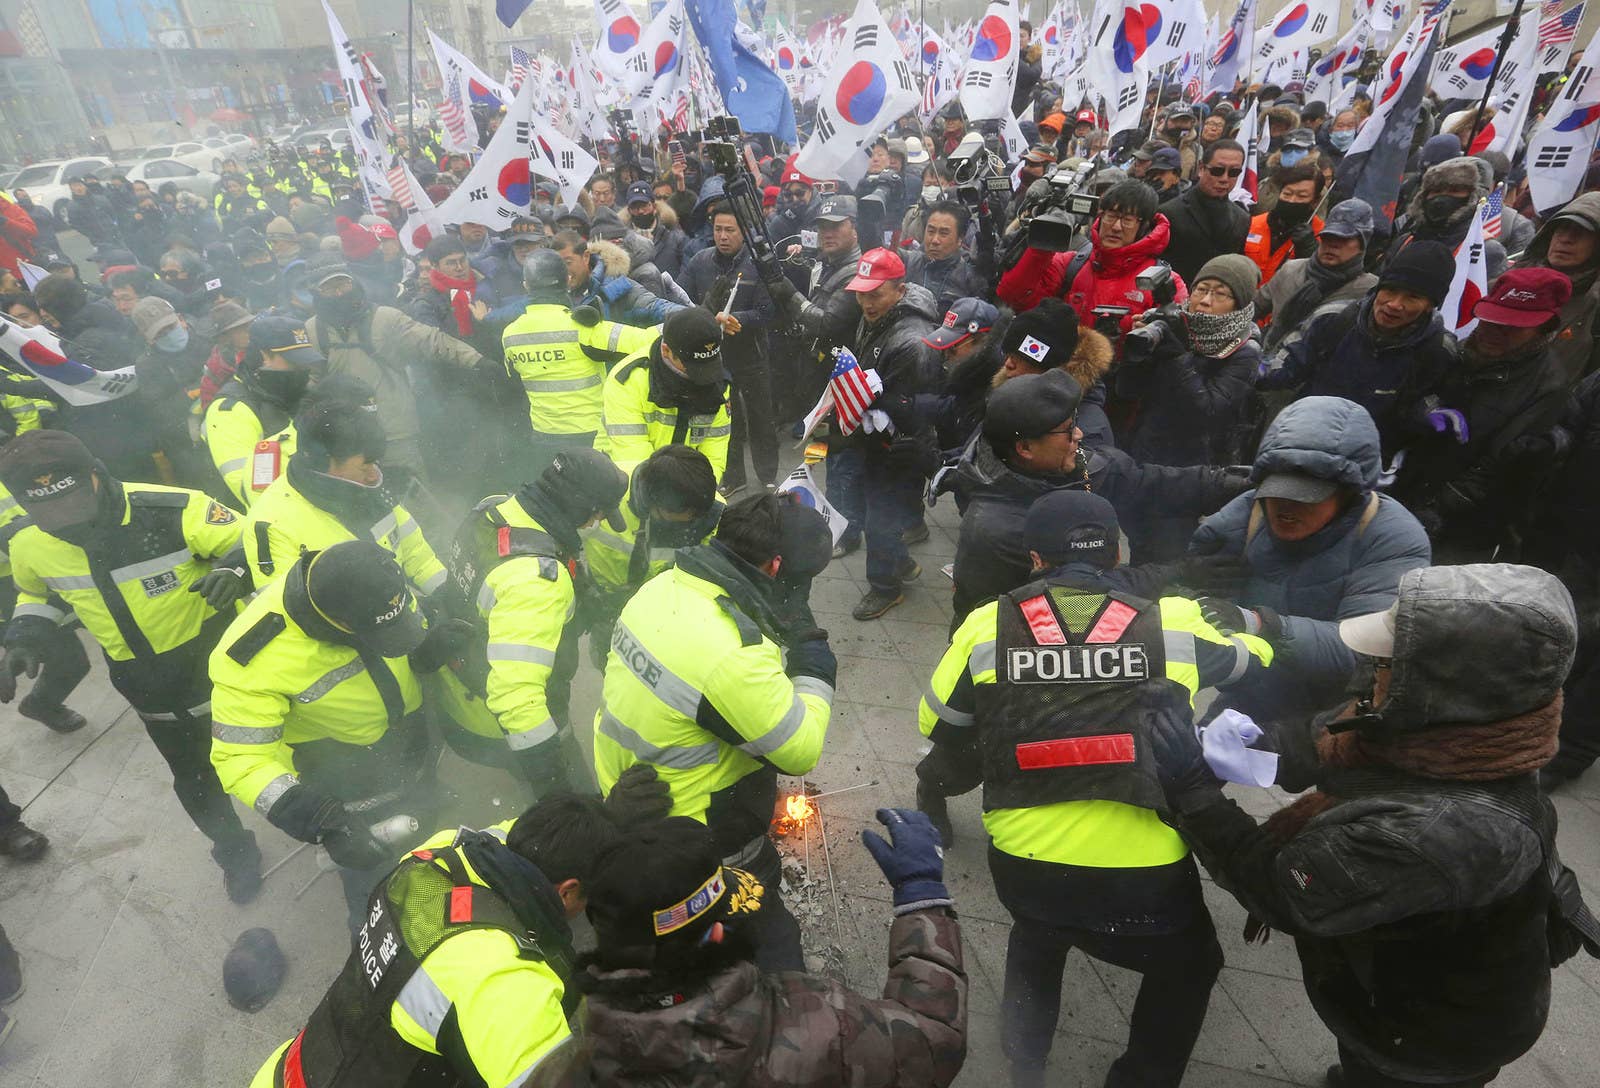 Protesters scuffle with police officers during a rally protesting North Korea's participation in the Pyeongchang 2018 Winter Olympics, in Seoul on Feb. 11.